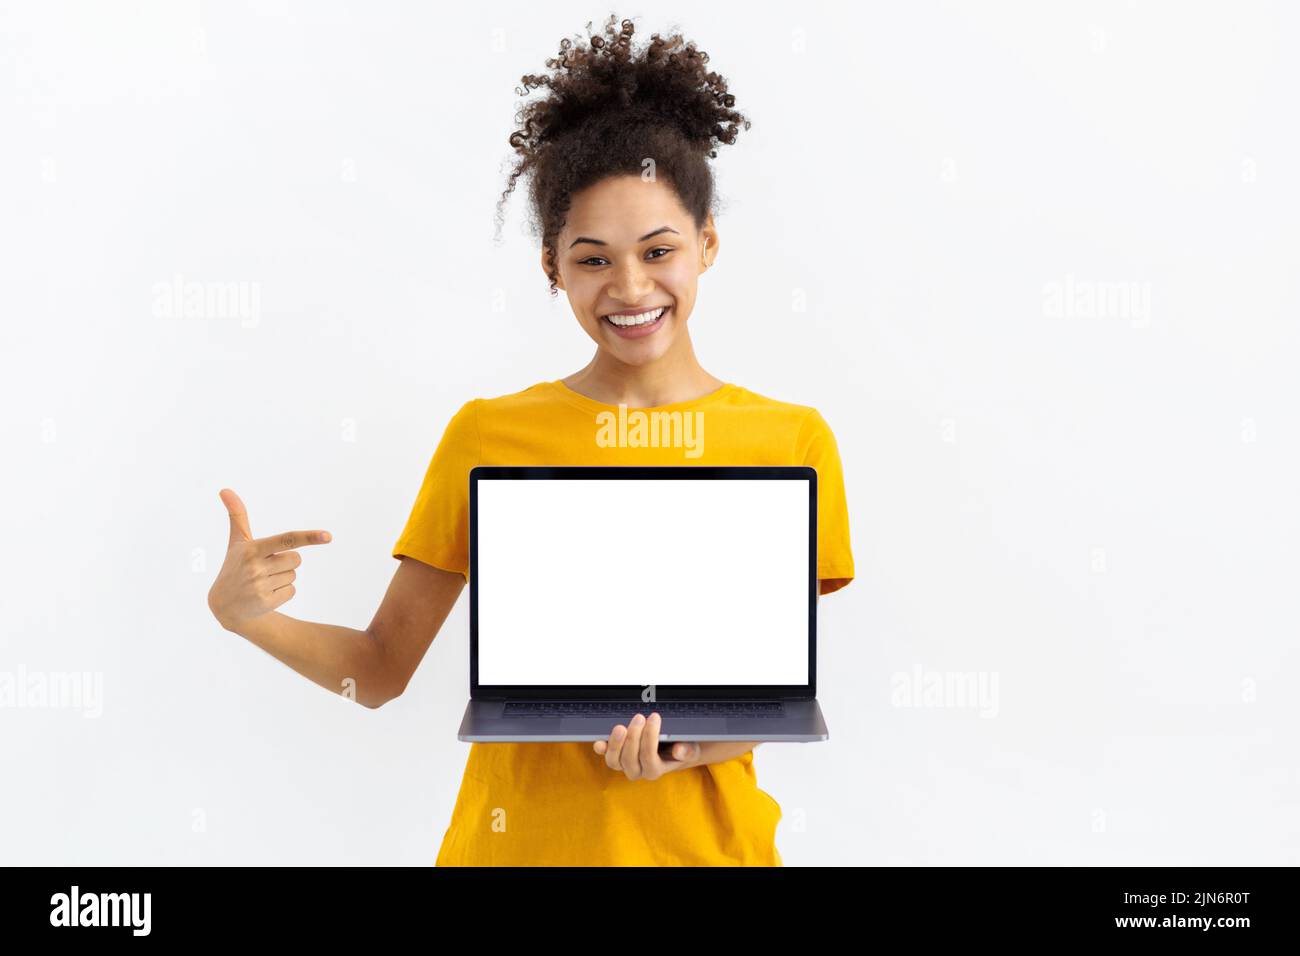 young woman with laptop on white background Beautiful female points her finger at blank laptop screen Stock Photo